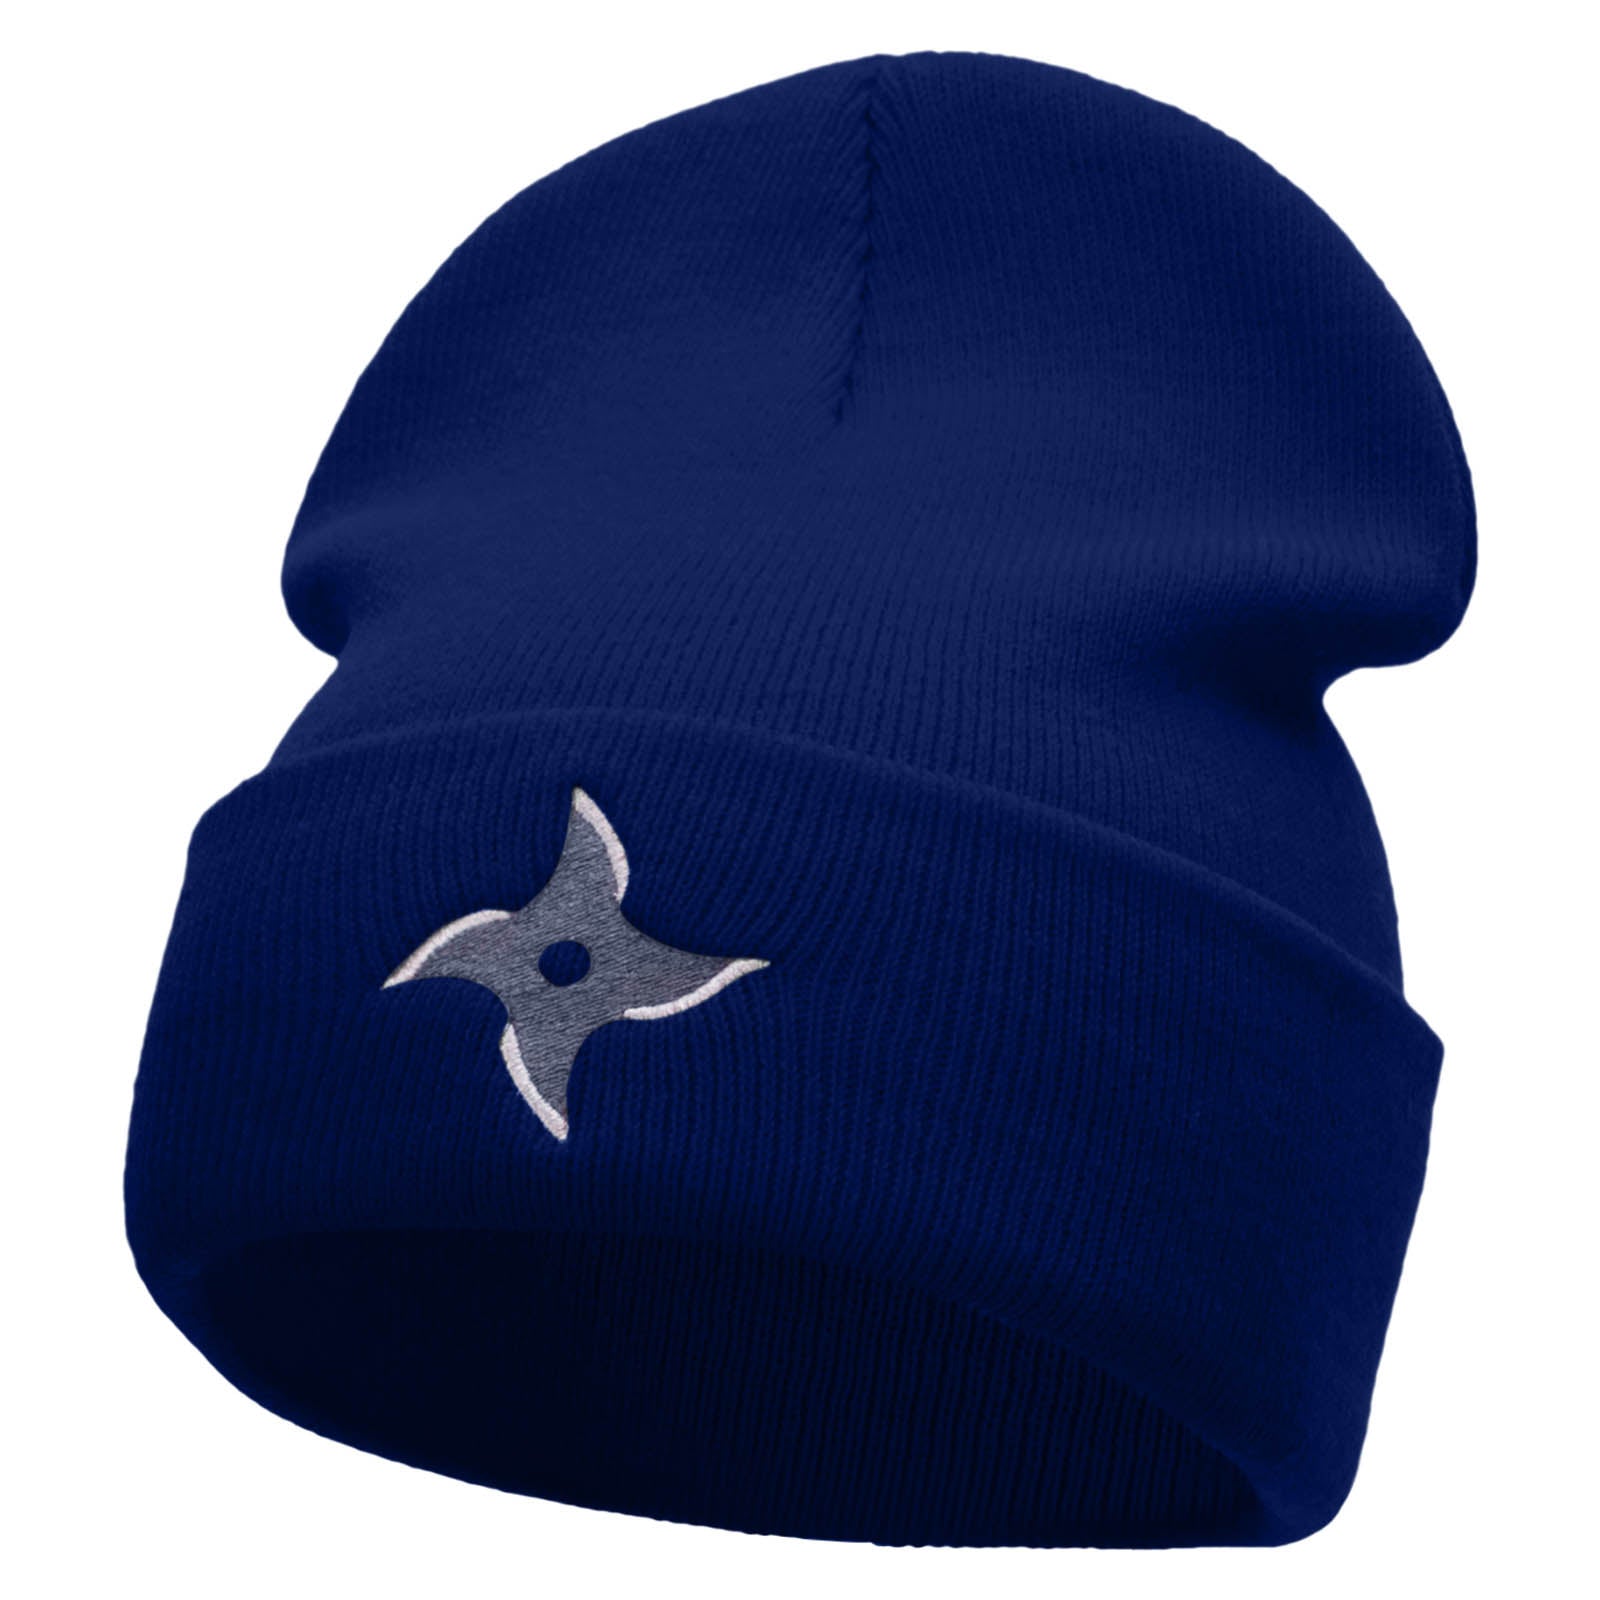 Ninja Star Embroidered 12 Inch Long Knitted Beanie - Royal OSFM